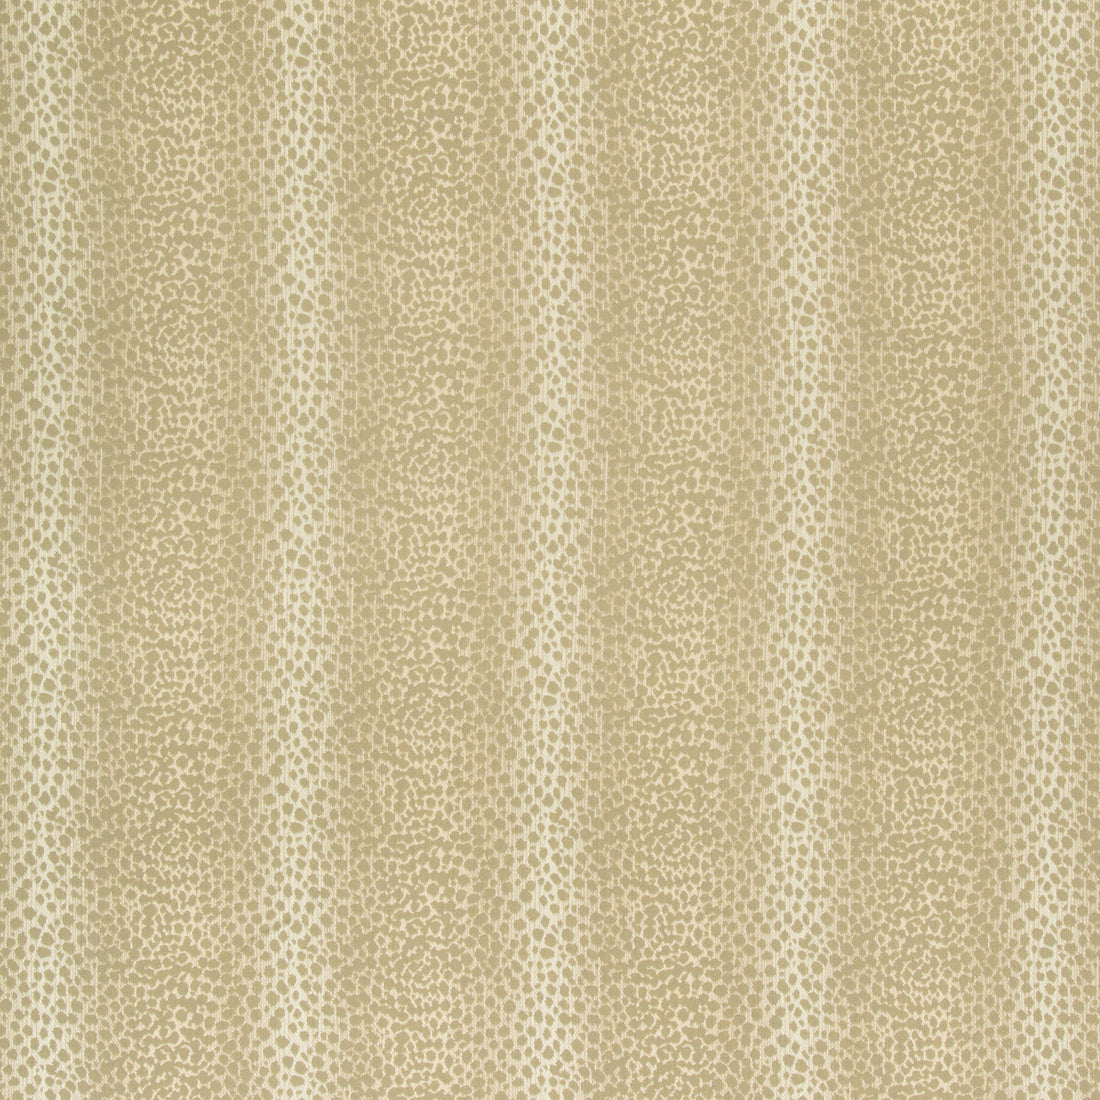 Kravet Contract fabric in 35047-16 color - pattern 35047.16.0 - by Kravet Contract in the Incase Crypton Gis collection